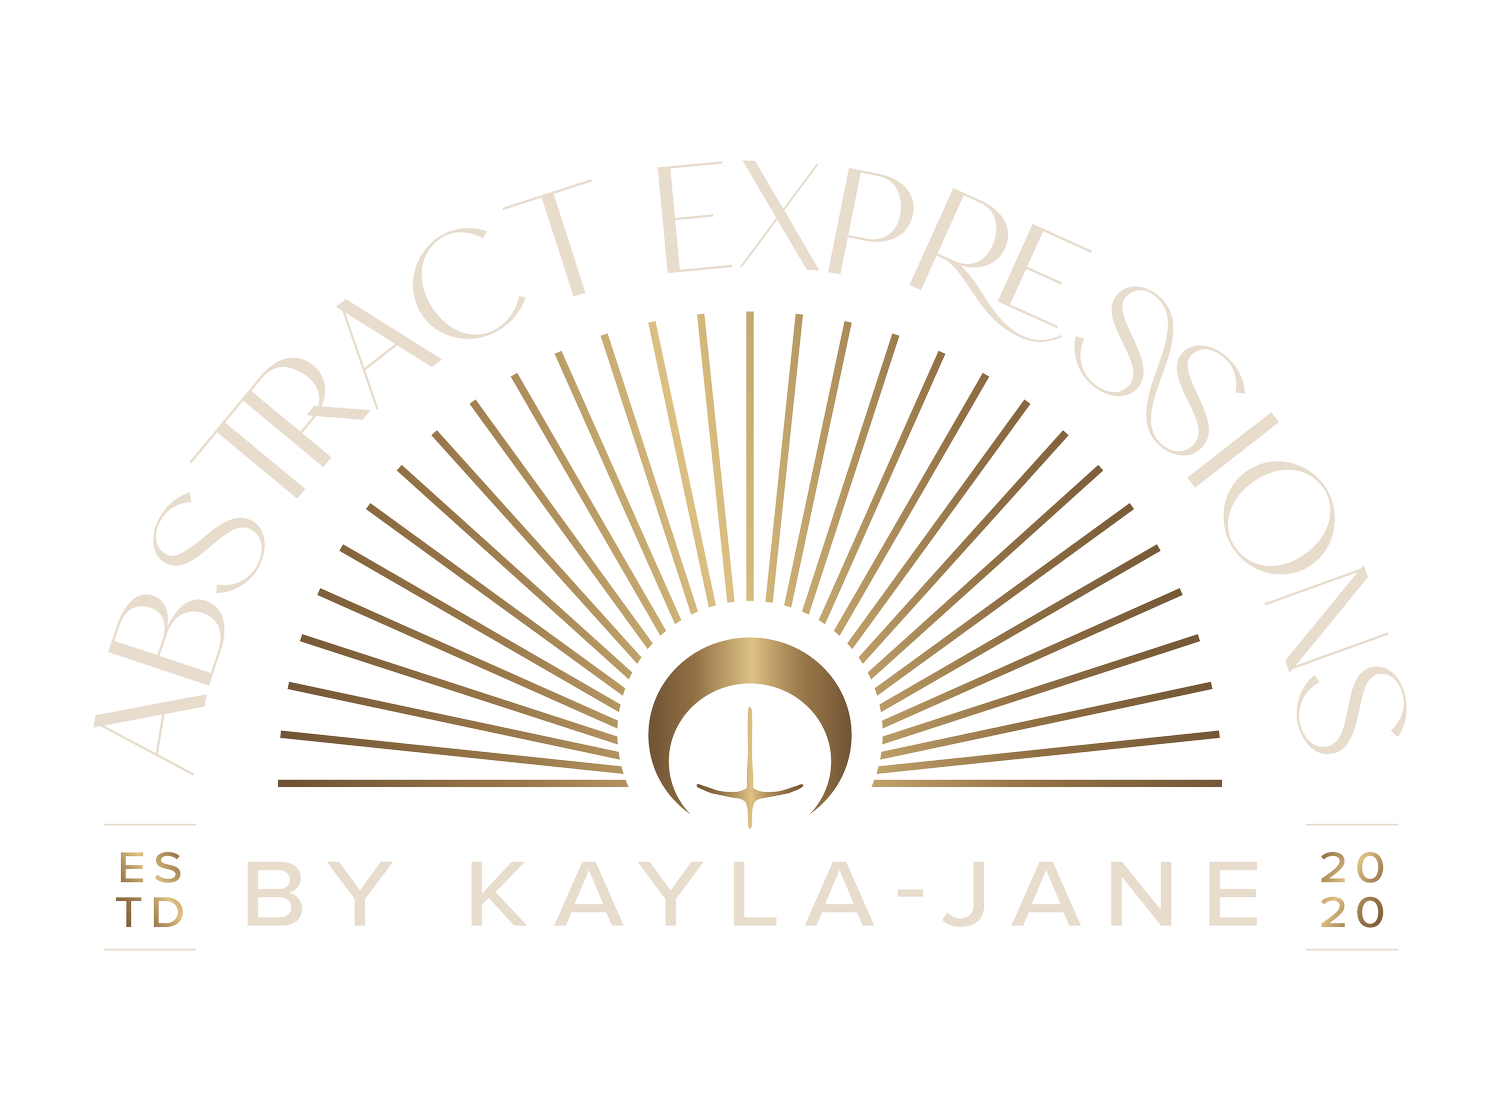 Abstract Expressions by Kayla-Jane